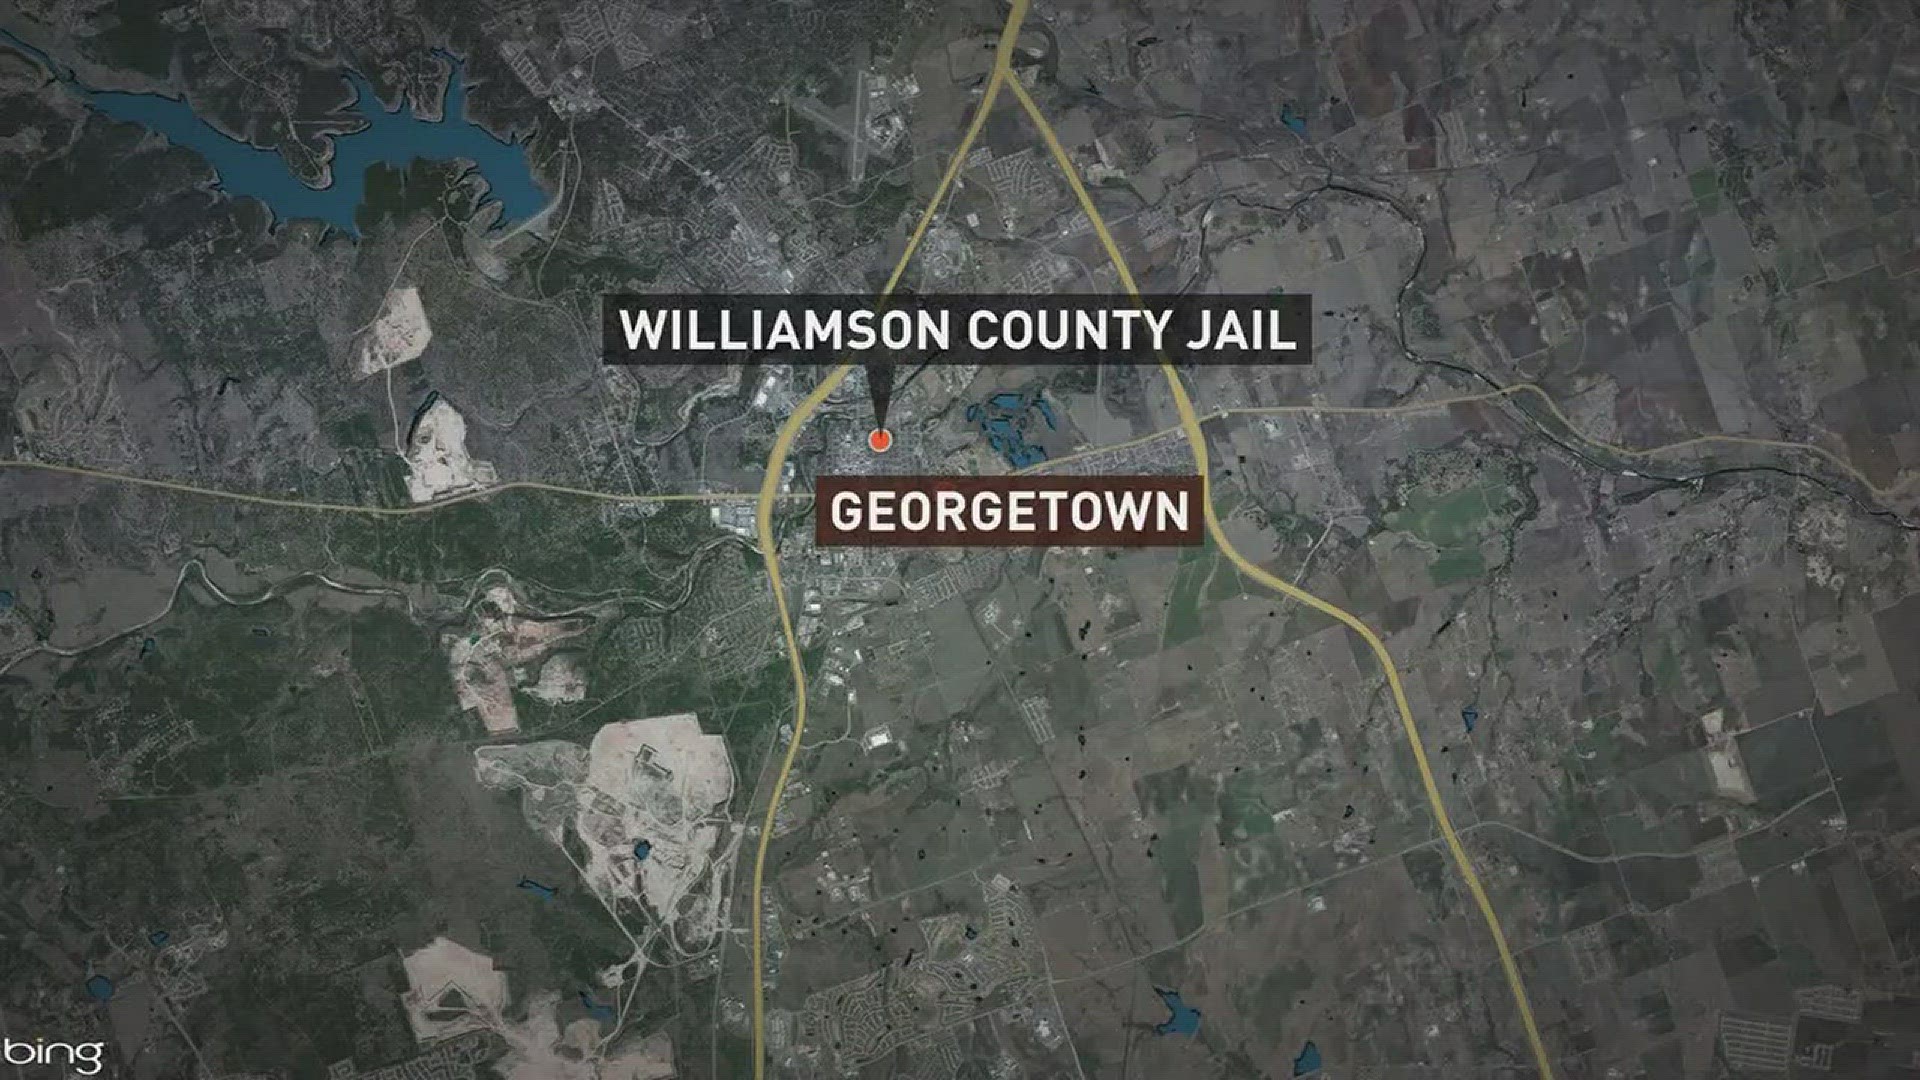 Greg Kelley to be transferred to Williamson County from Huntsville